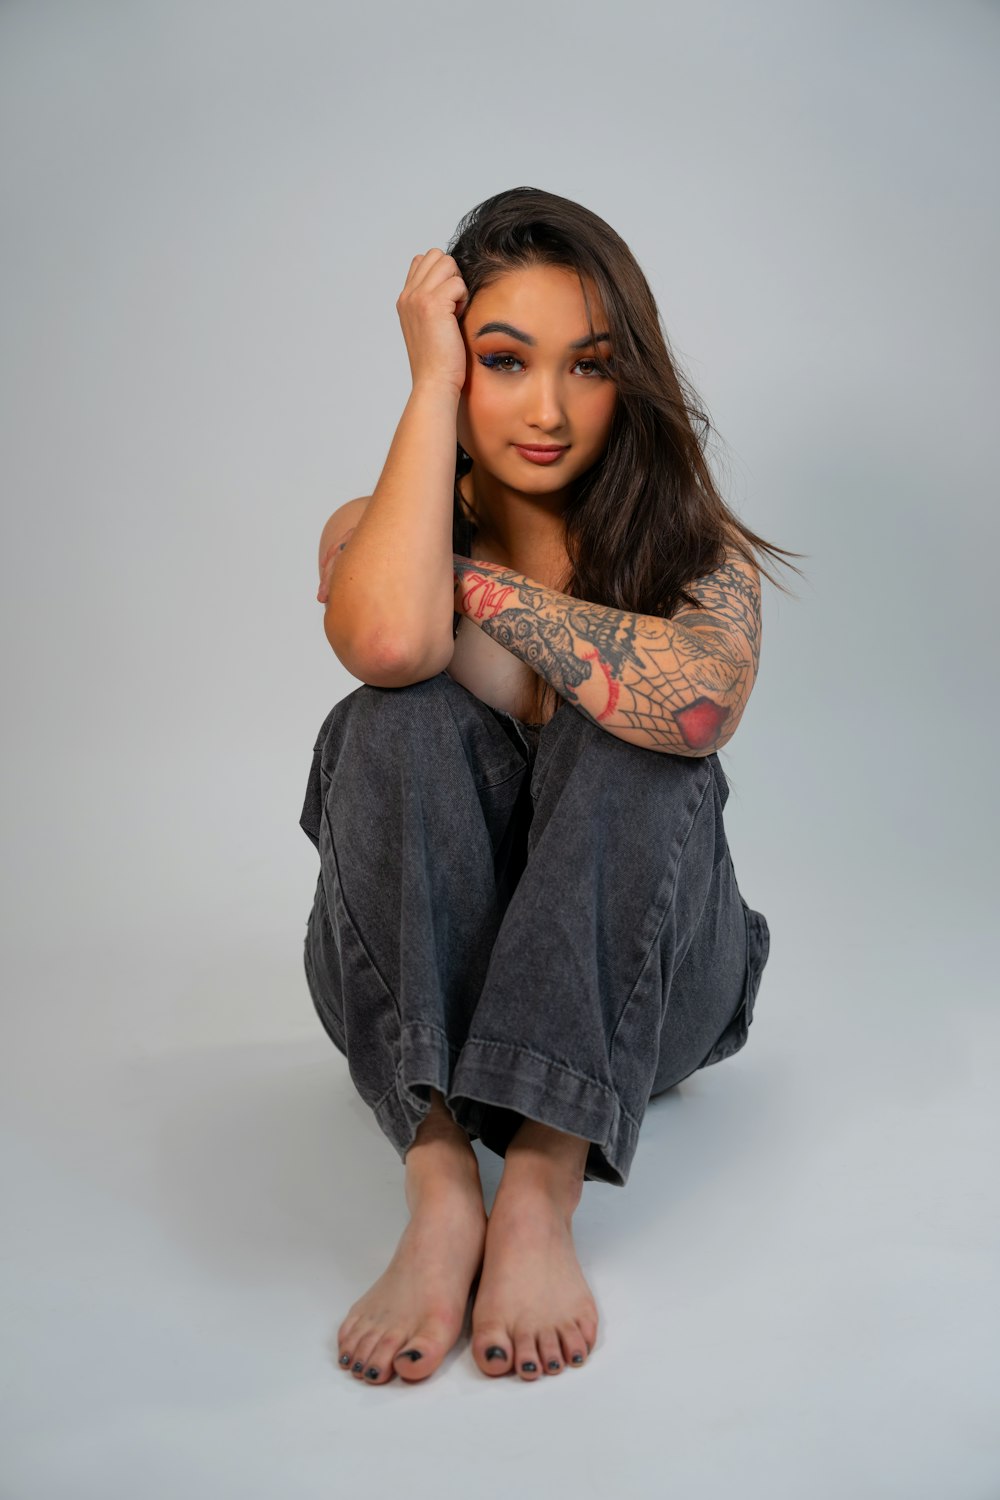 a woman with tattoos sitting on the ground